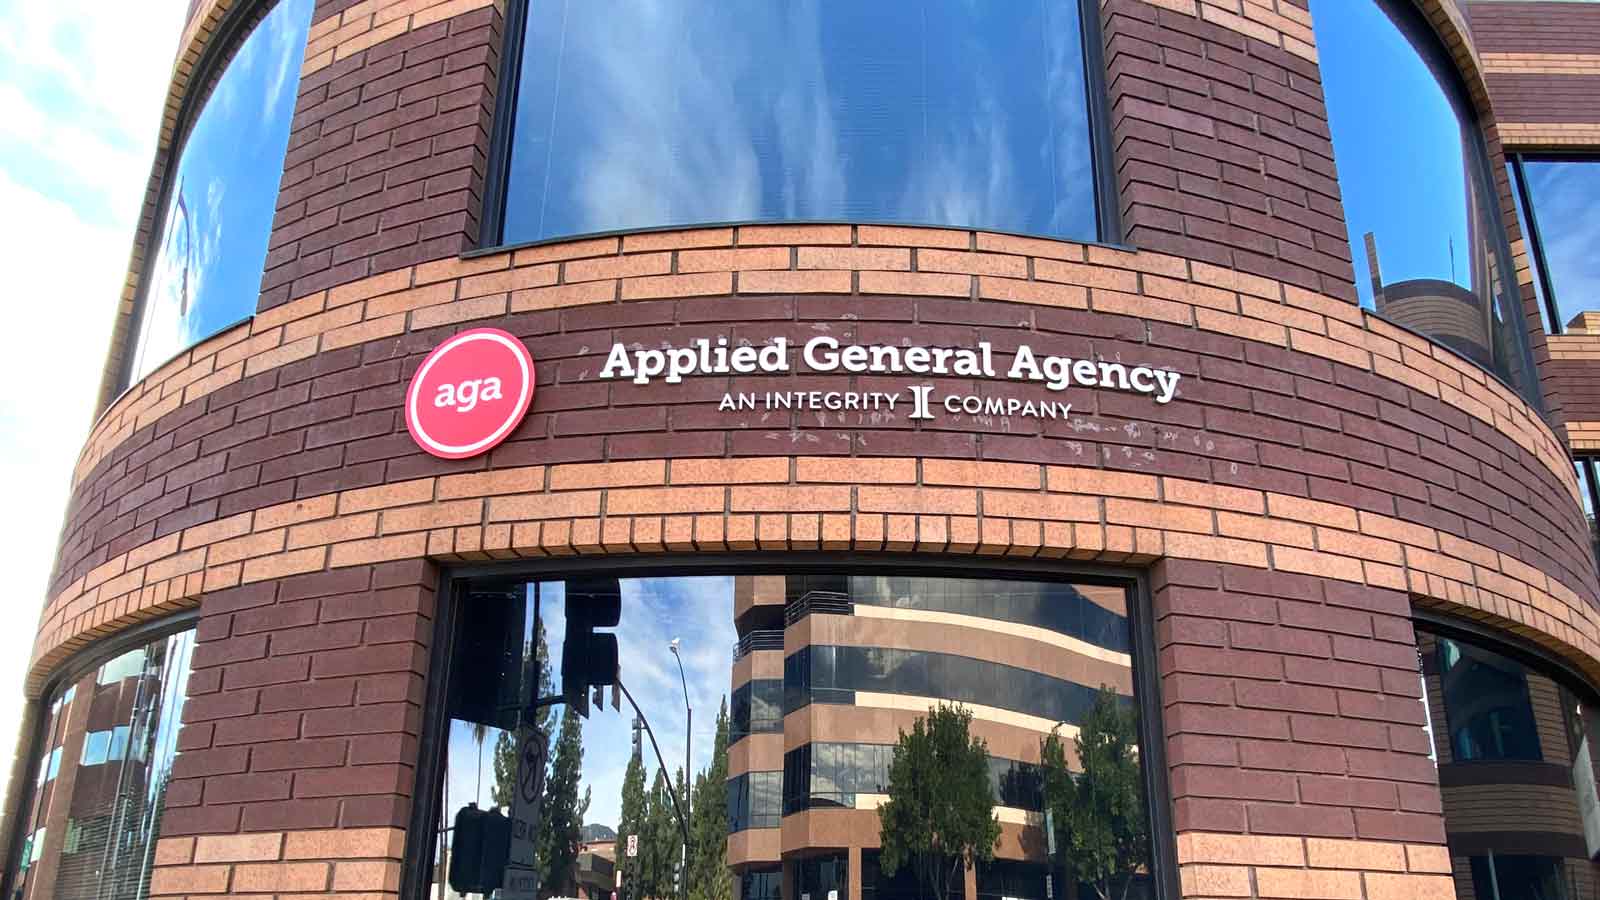 applied general agency outdoor sign installed on the facade